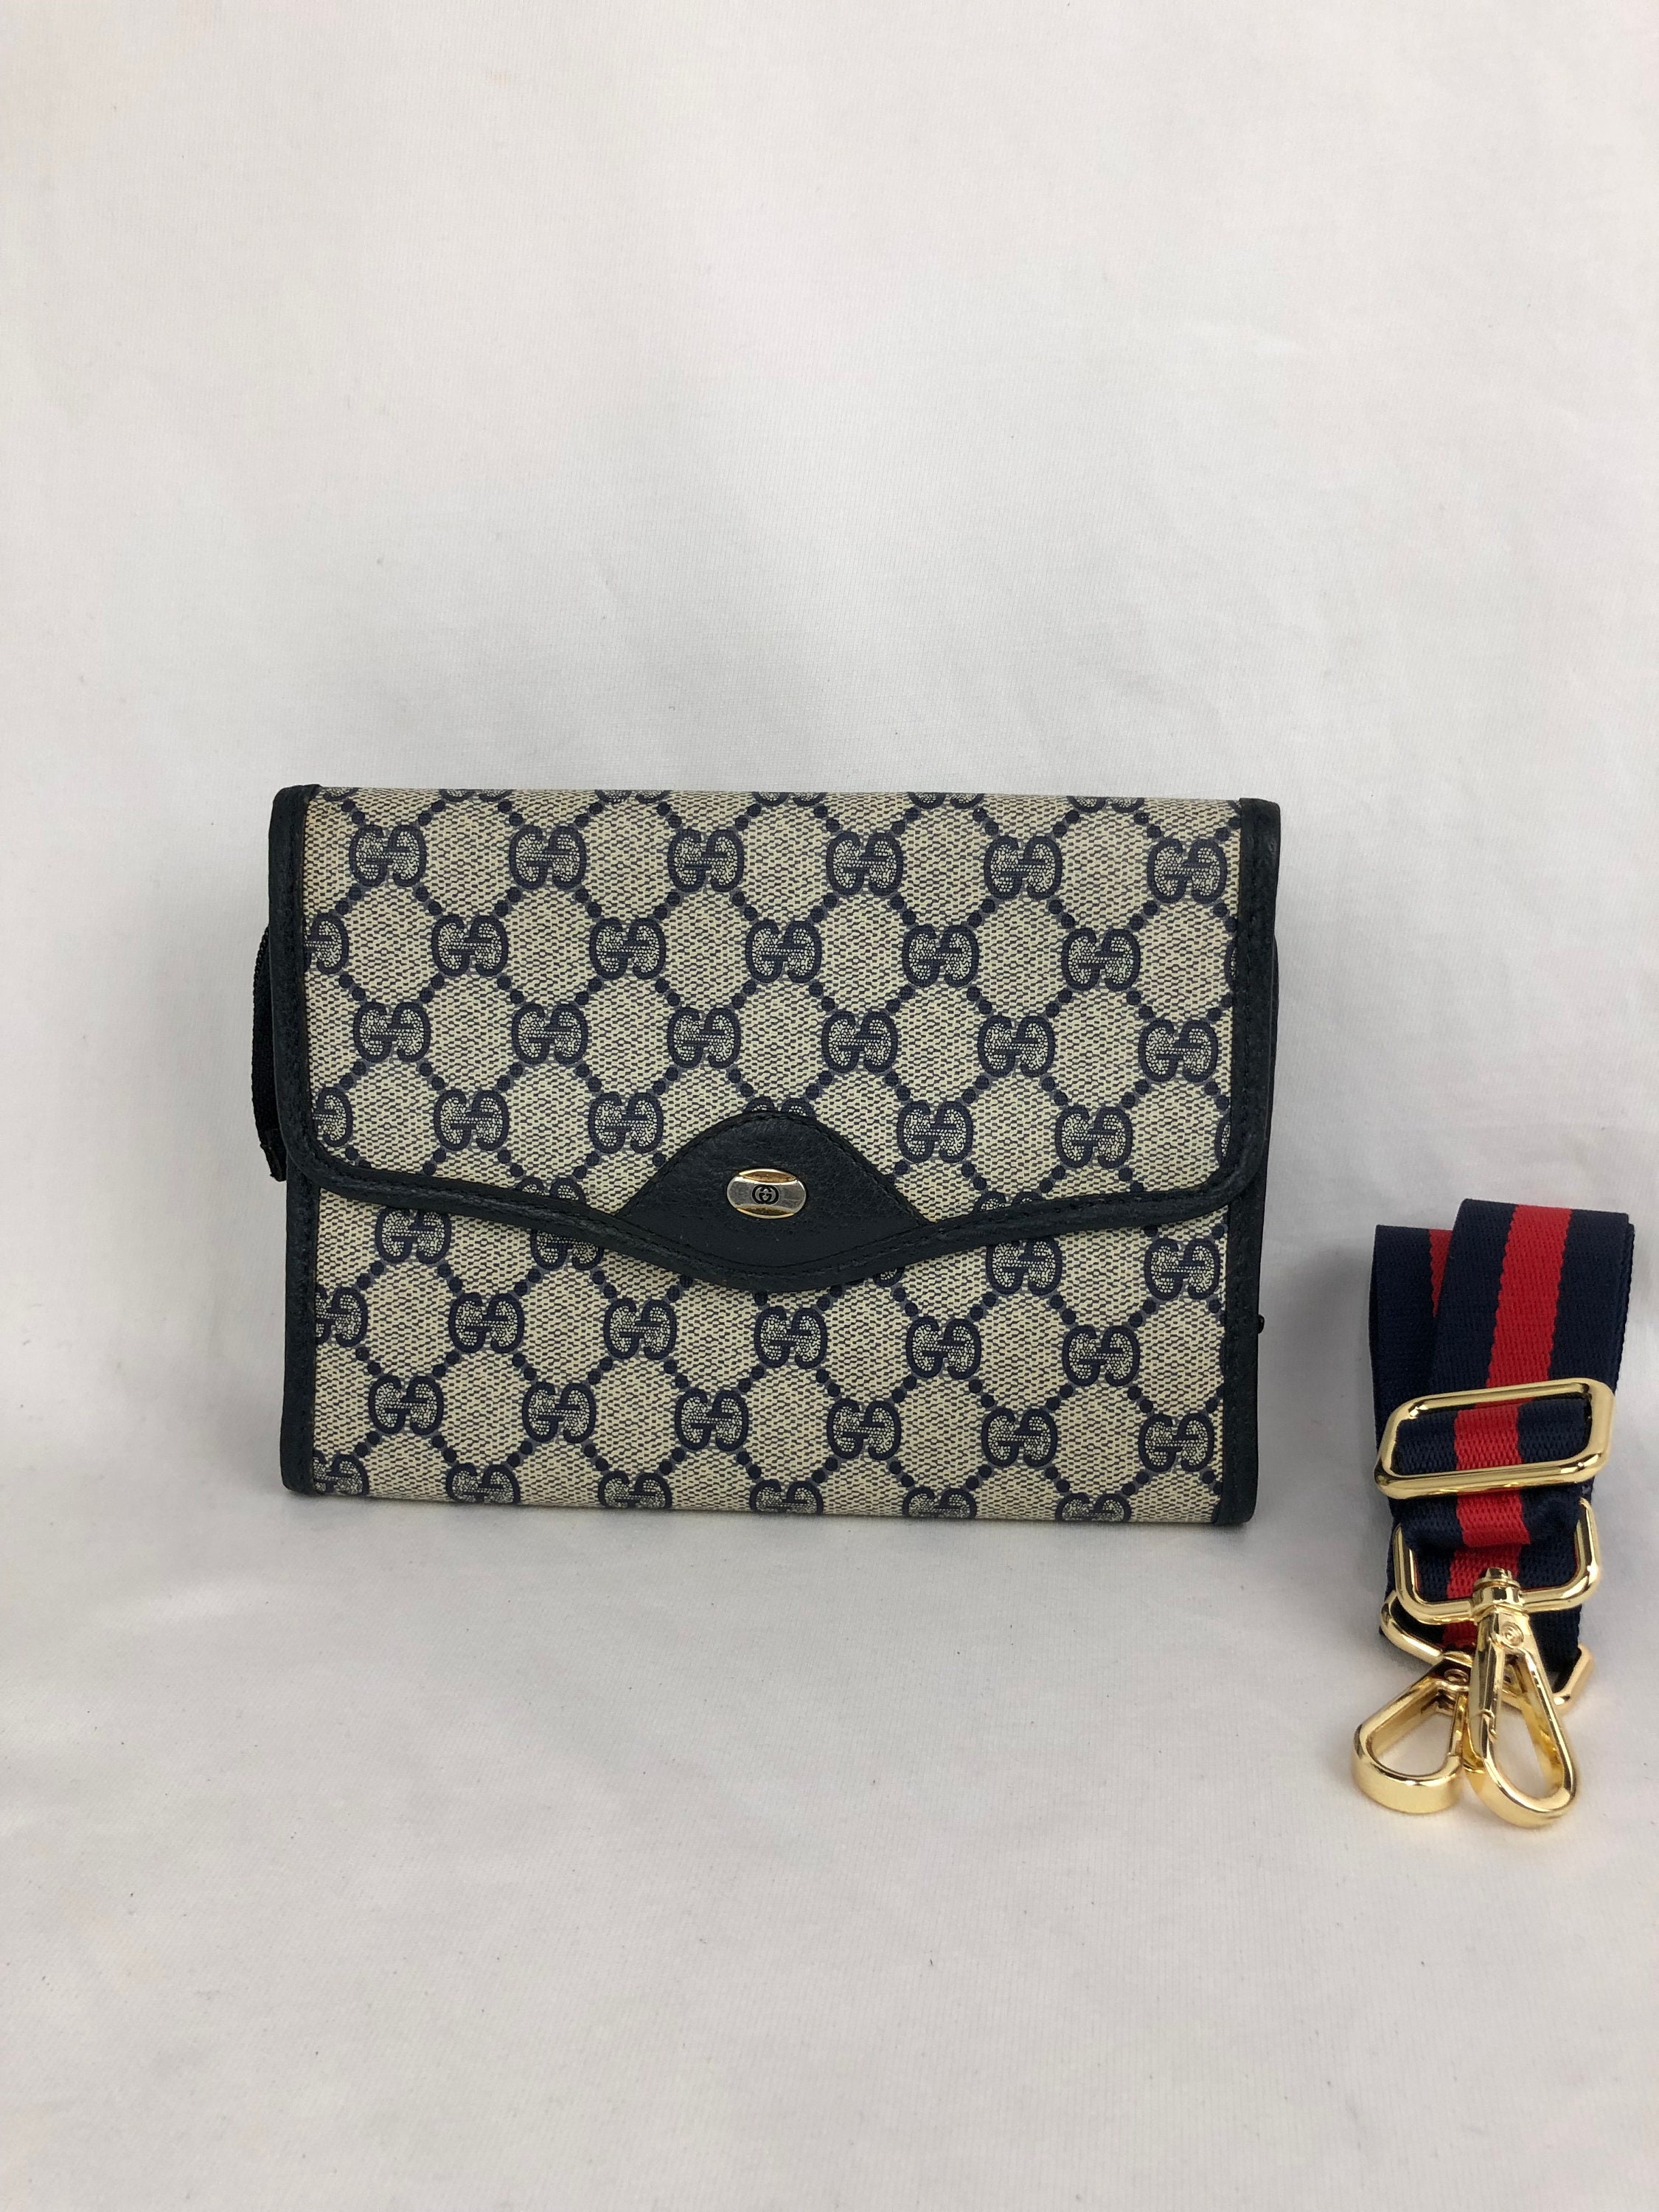 Gucci Beige GG Supreme Canvas and Leather Kingsnake Card Holder Lanyard  Gucci